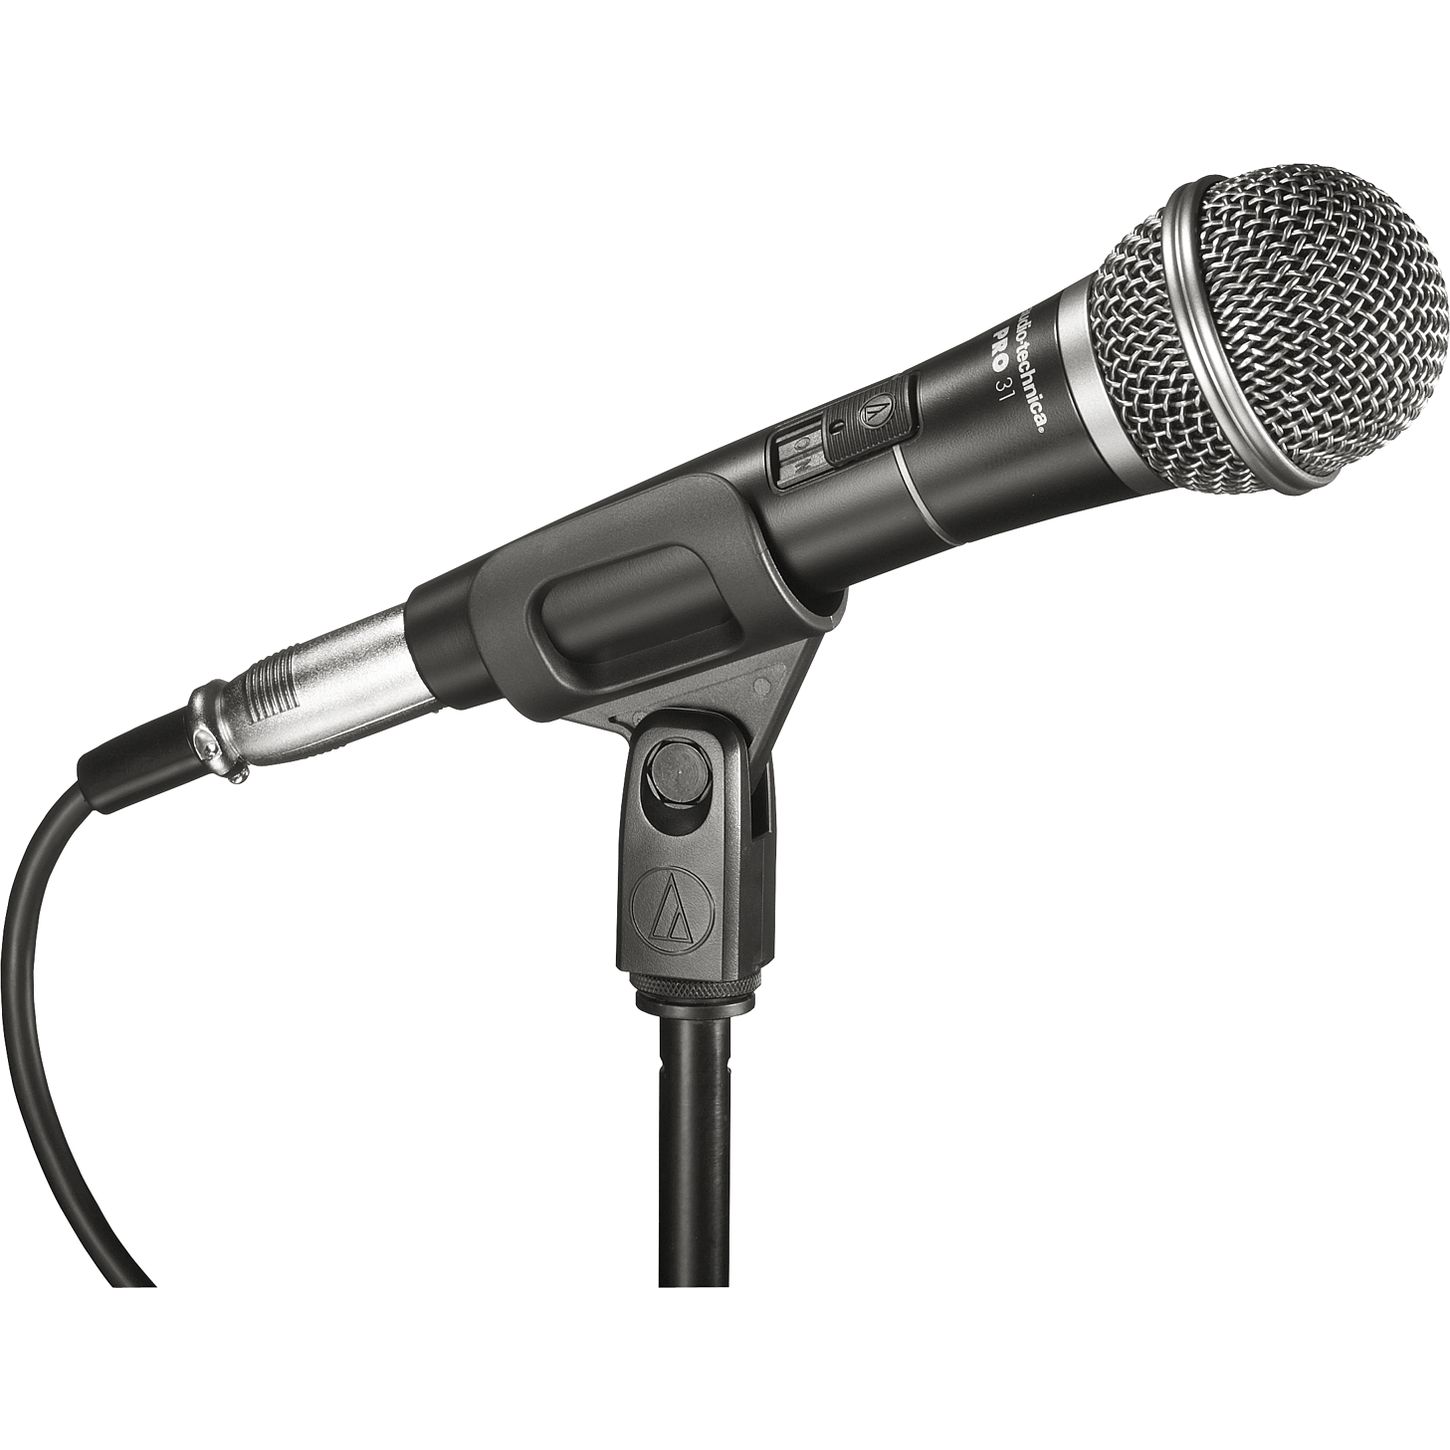 Images of Microphone | 1450x1450